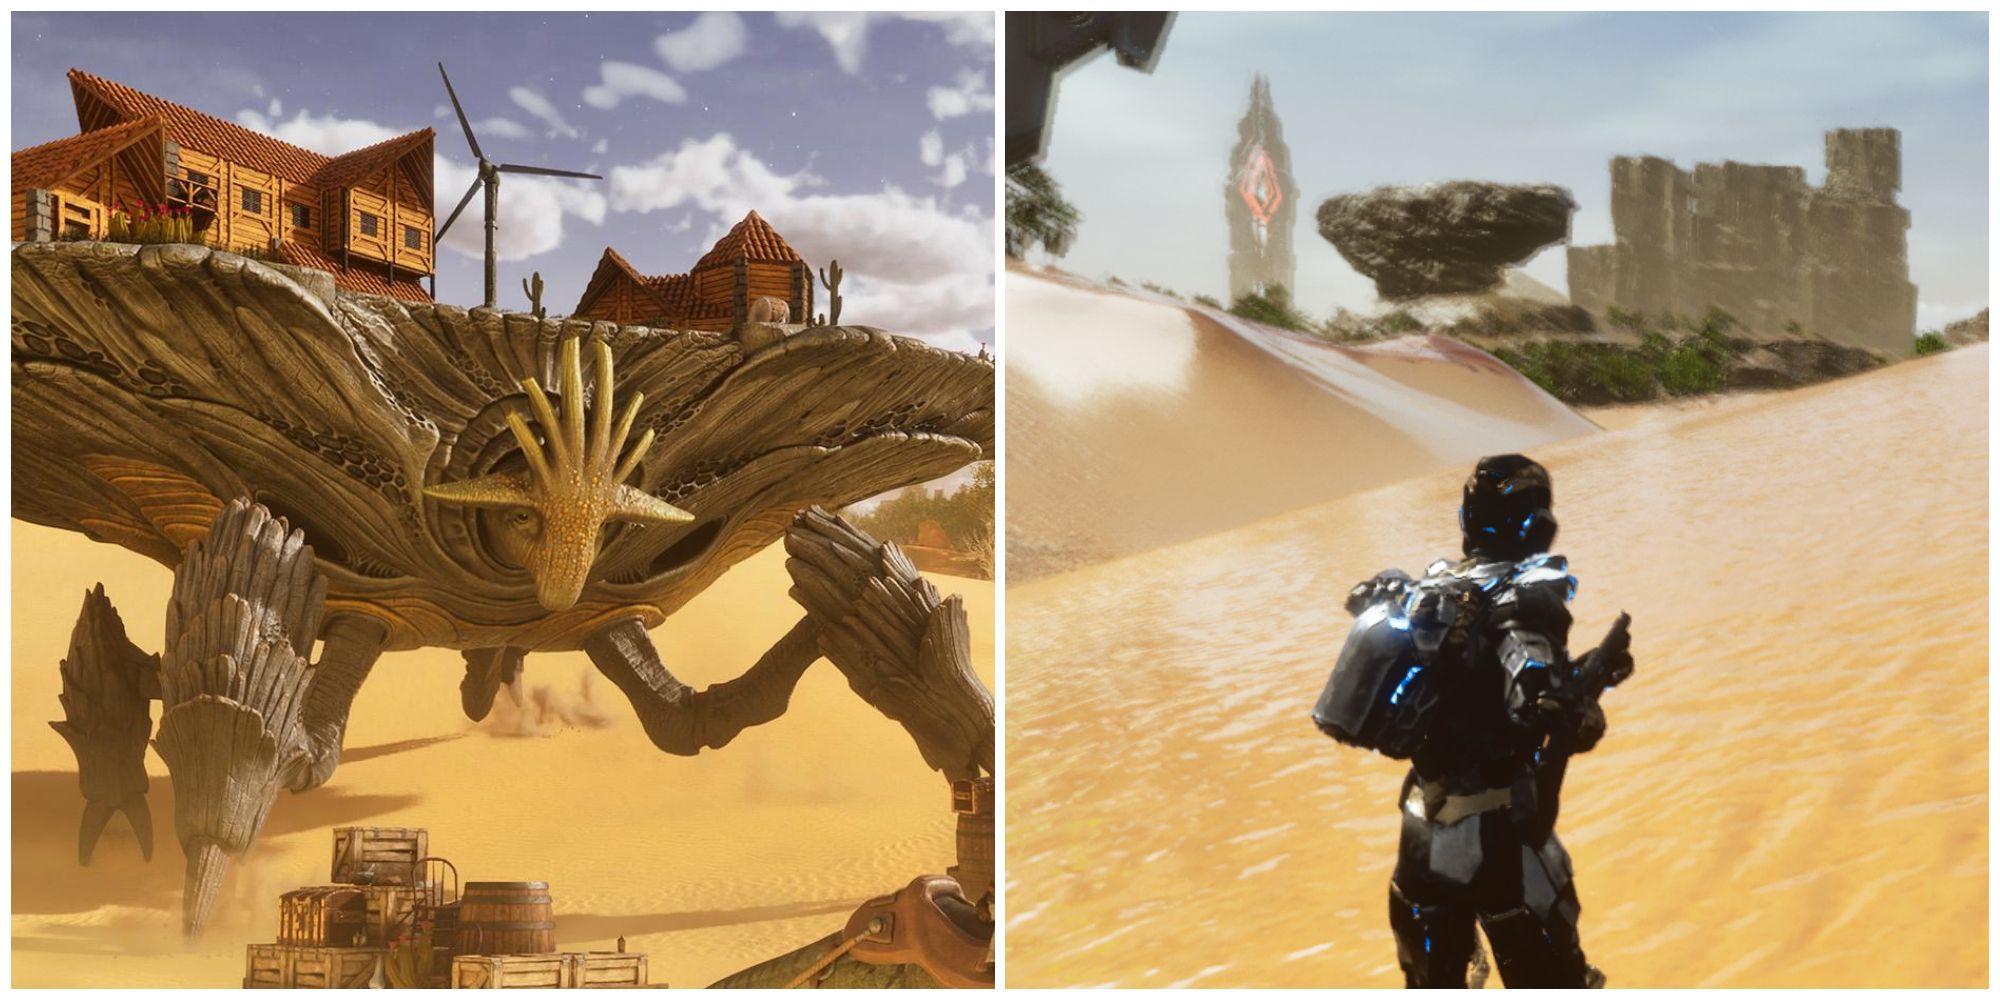 Split image of the oasisaur and the dunes in Scorched Earth in Ark Survival Ascended